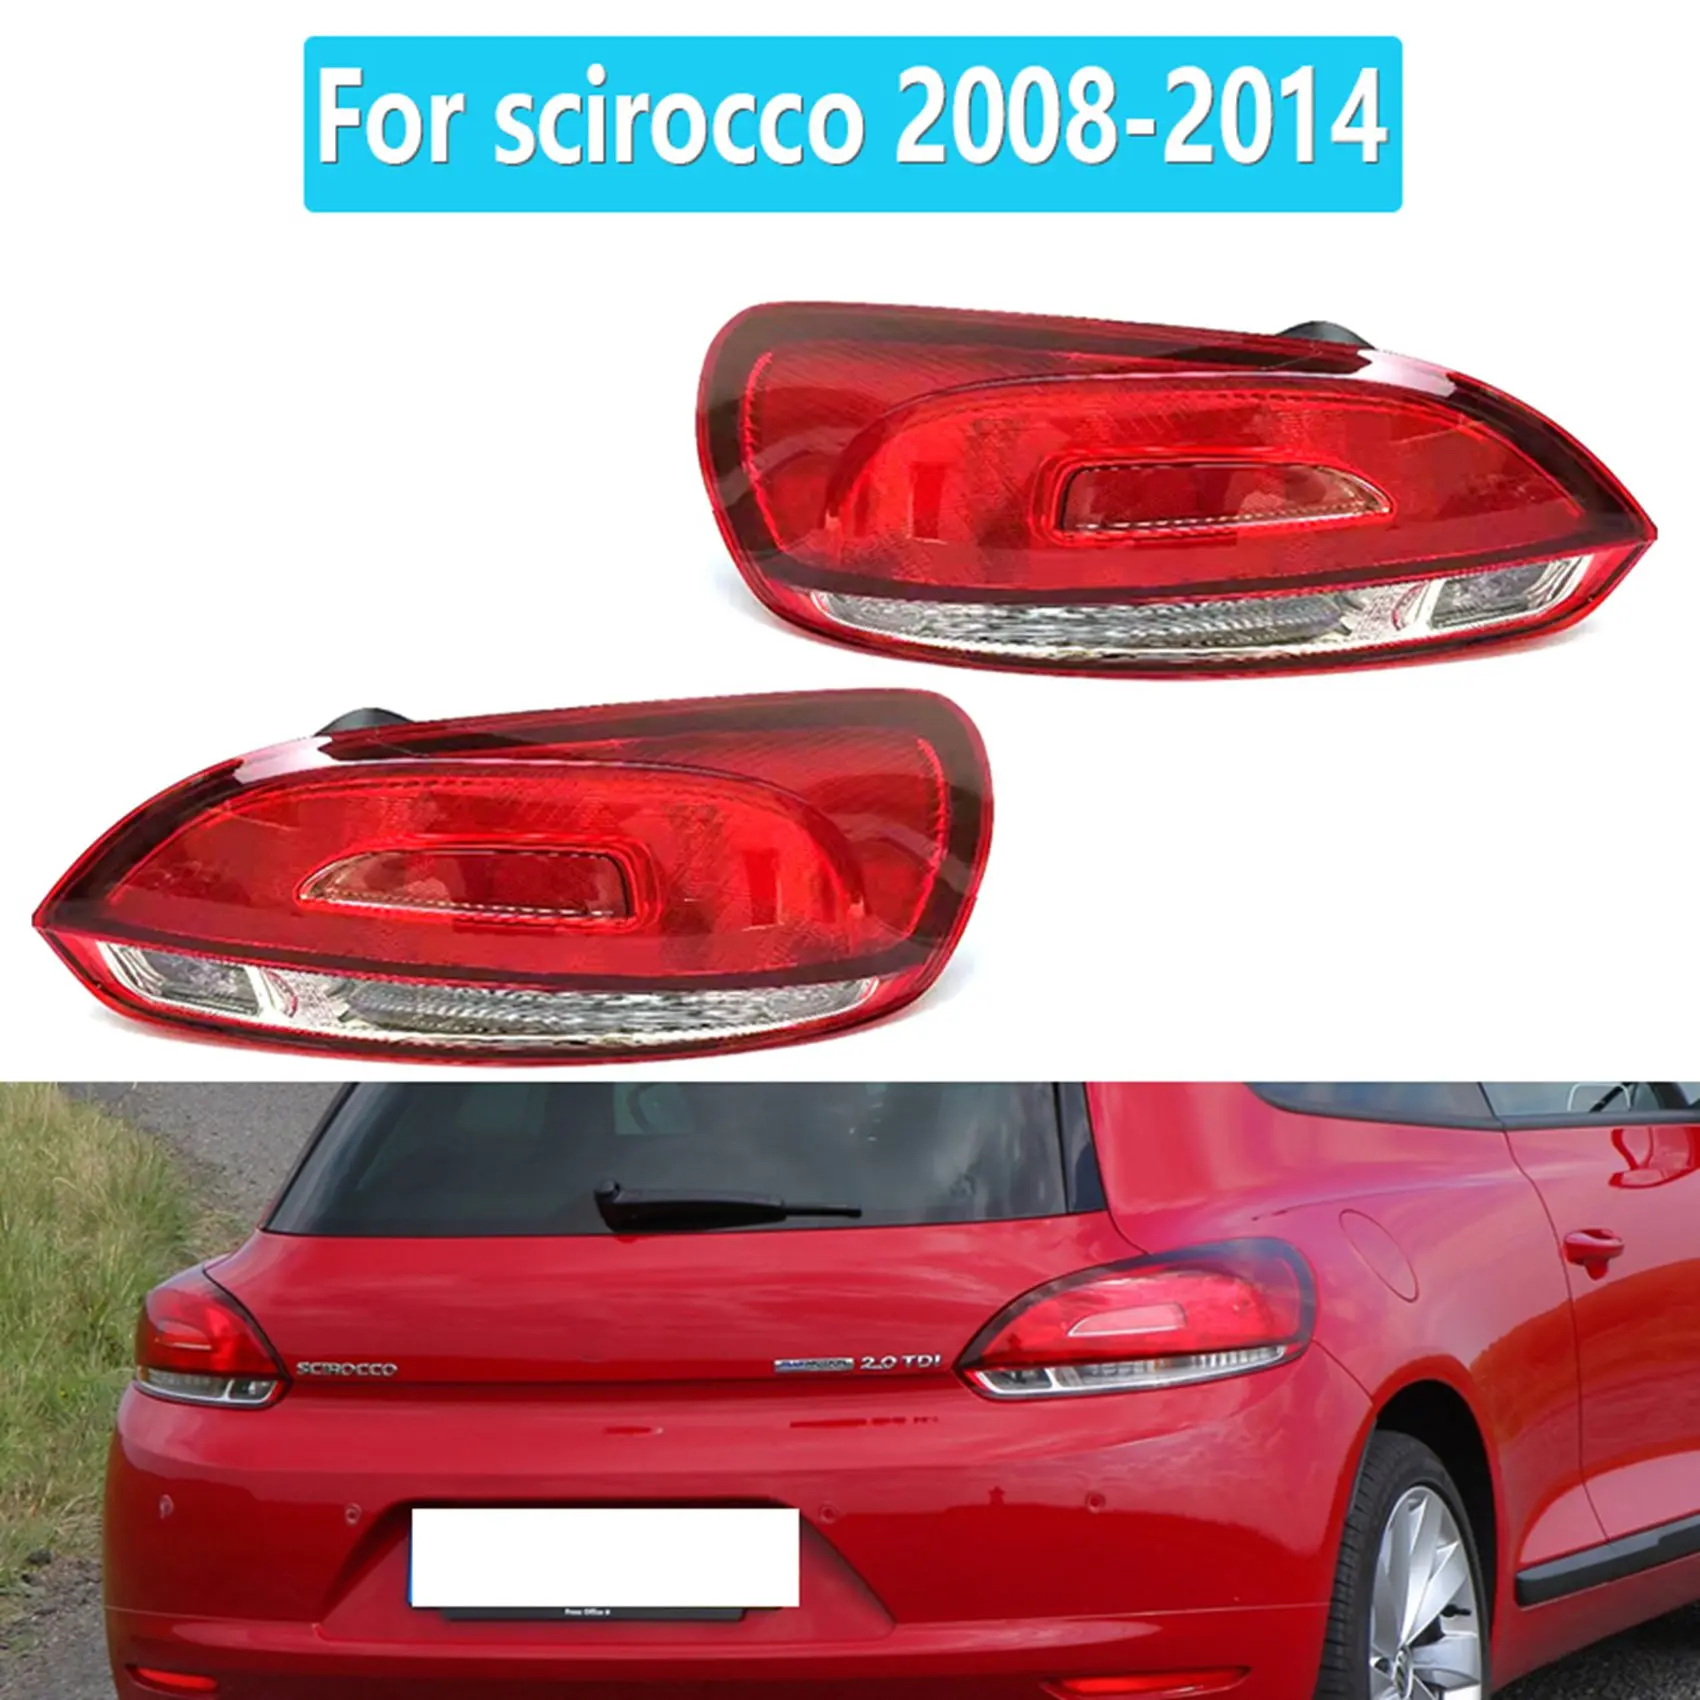 

Left Tail Light Rear Brake Lamp Without Bulb Stop Warning Lights For-VW Scirocco 2008-2014 1K8945096R 1K8945095G